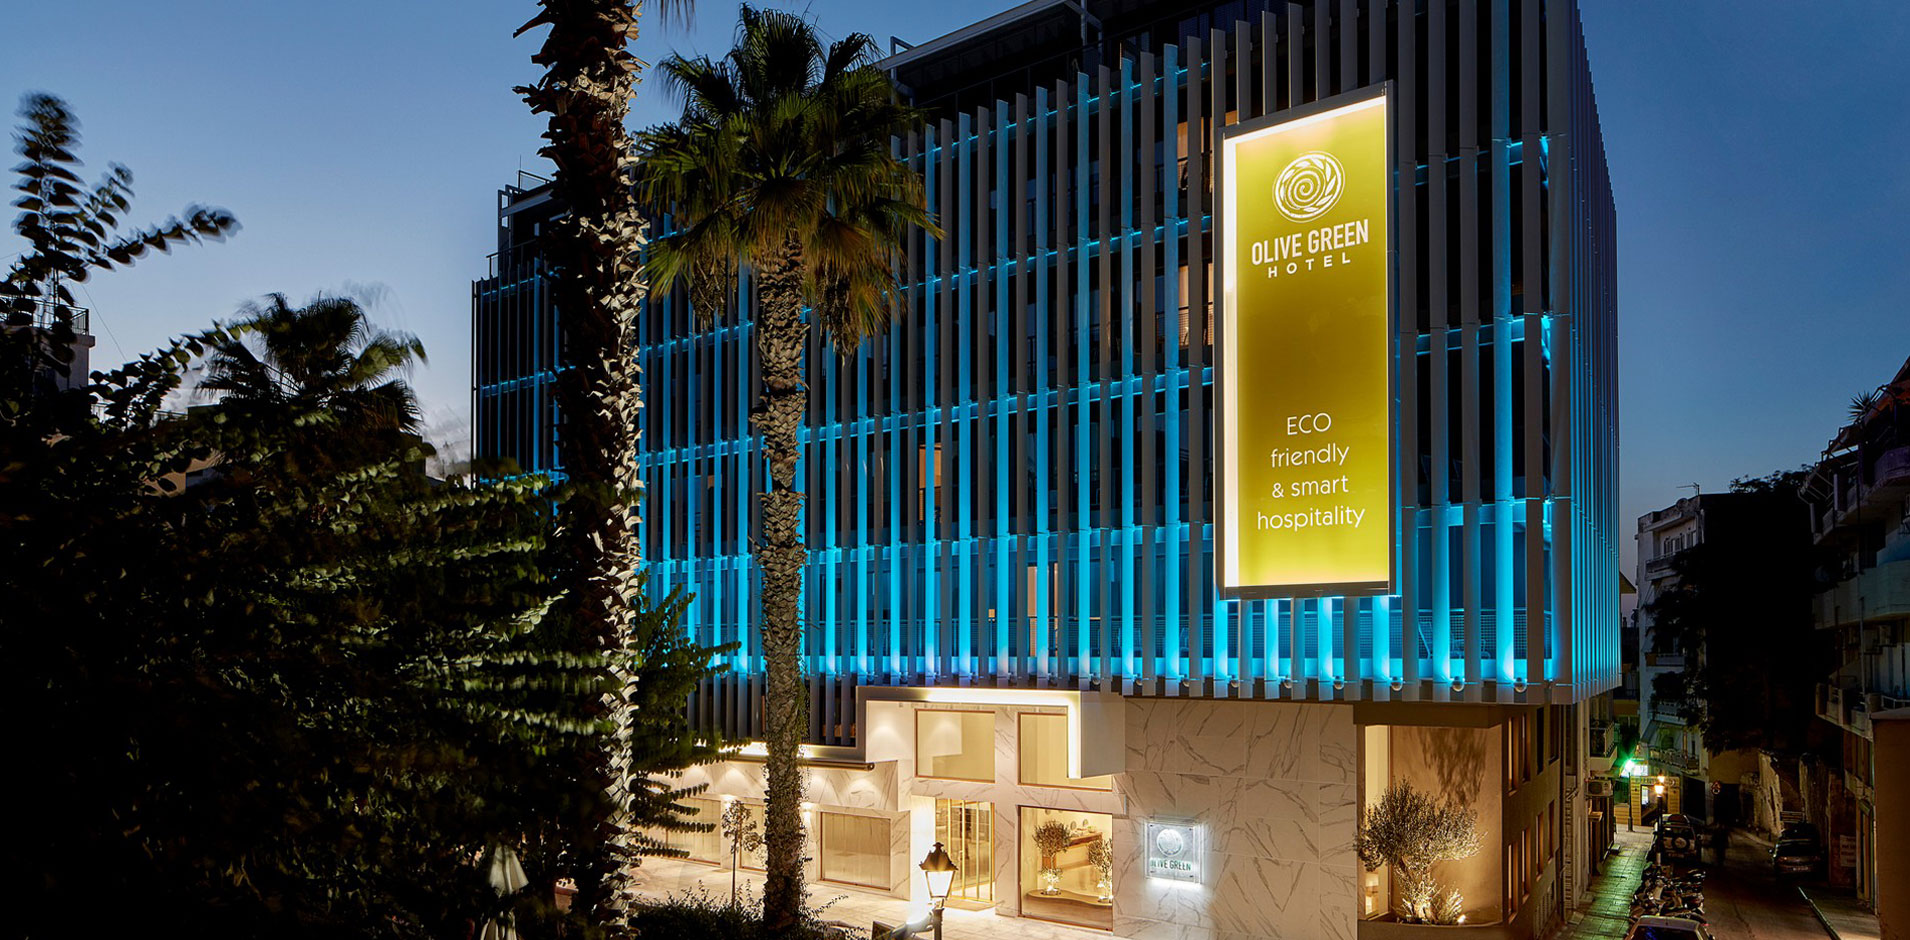 Olive Green Boutique Hotel - Your Eco-friendly Stay in Heraklion